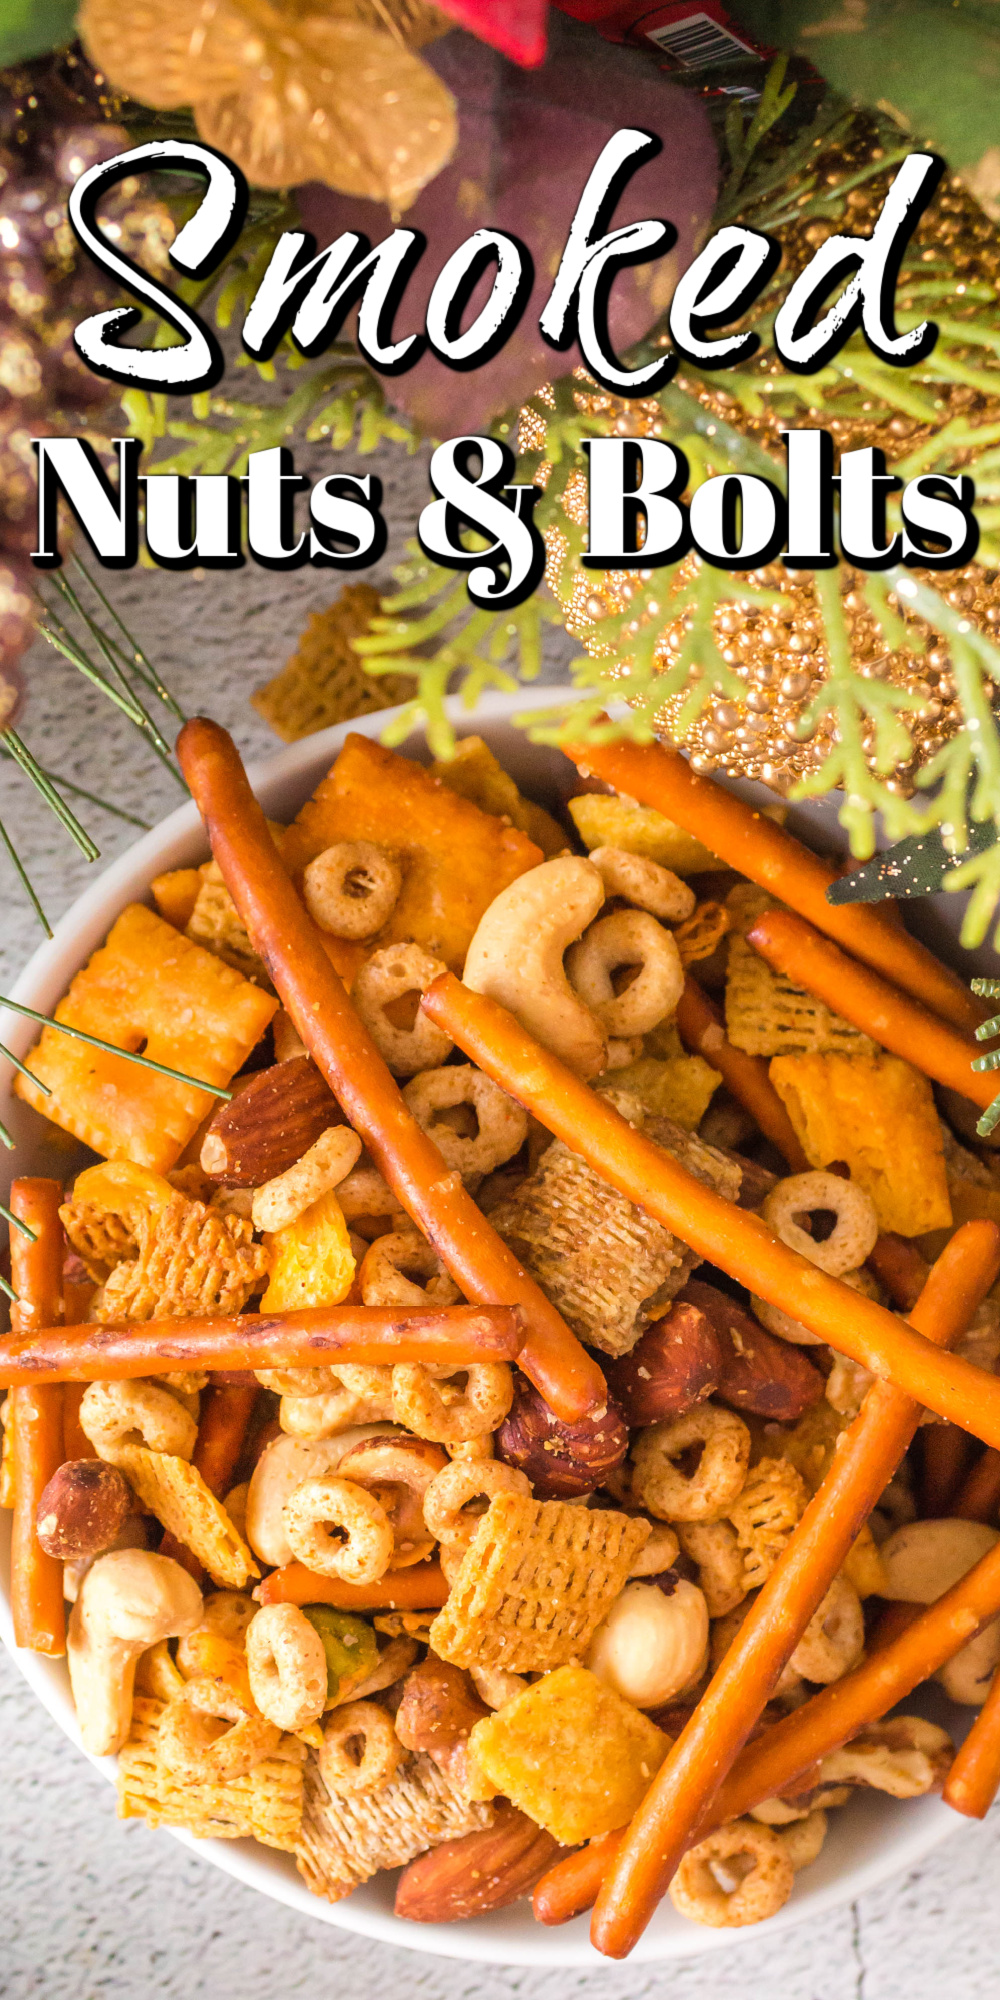 These smoked mixed nuts and bolts are the perfect snack for any gathering from holidays to game days. Everyone is going to love them!